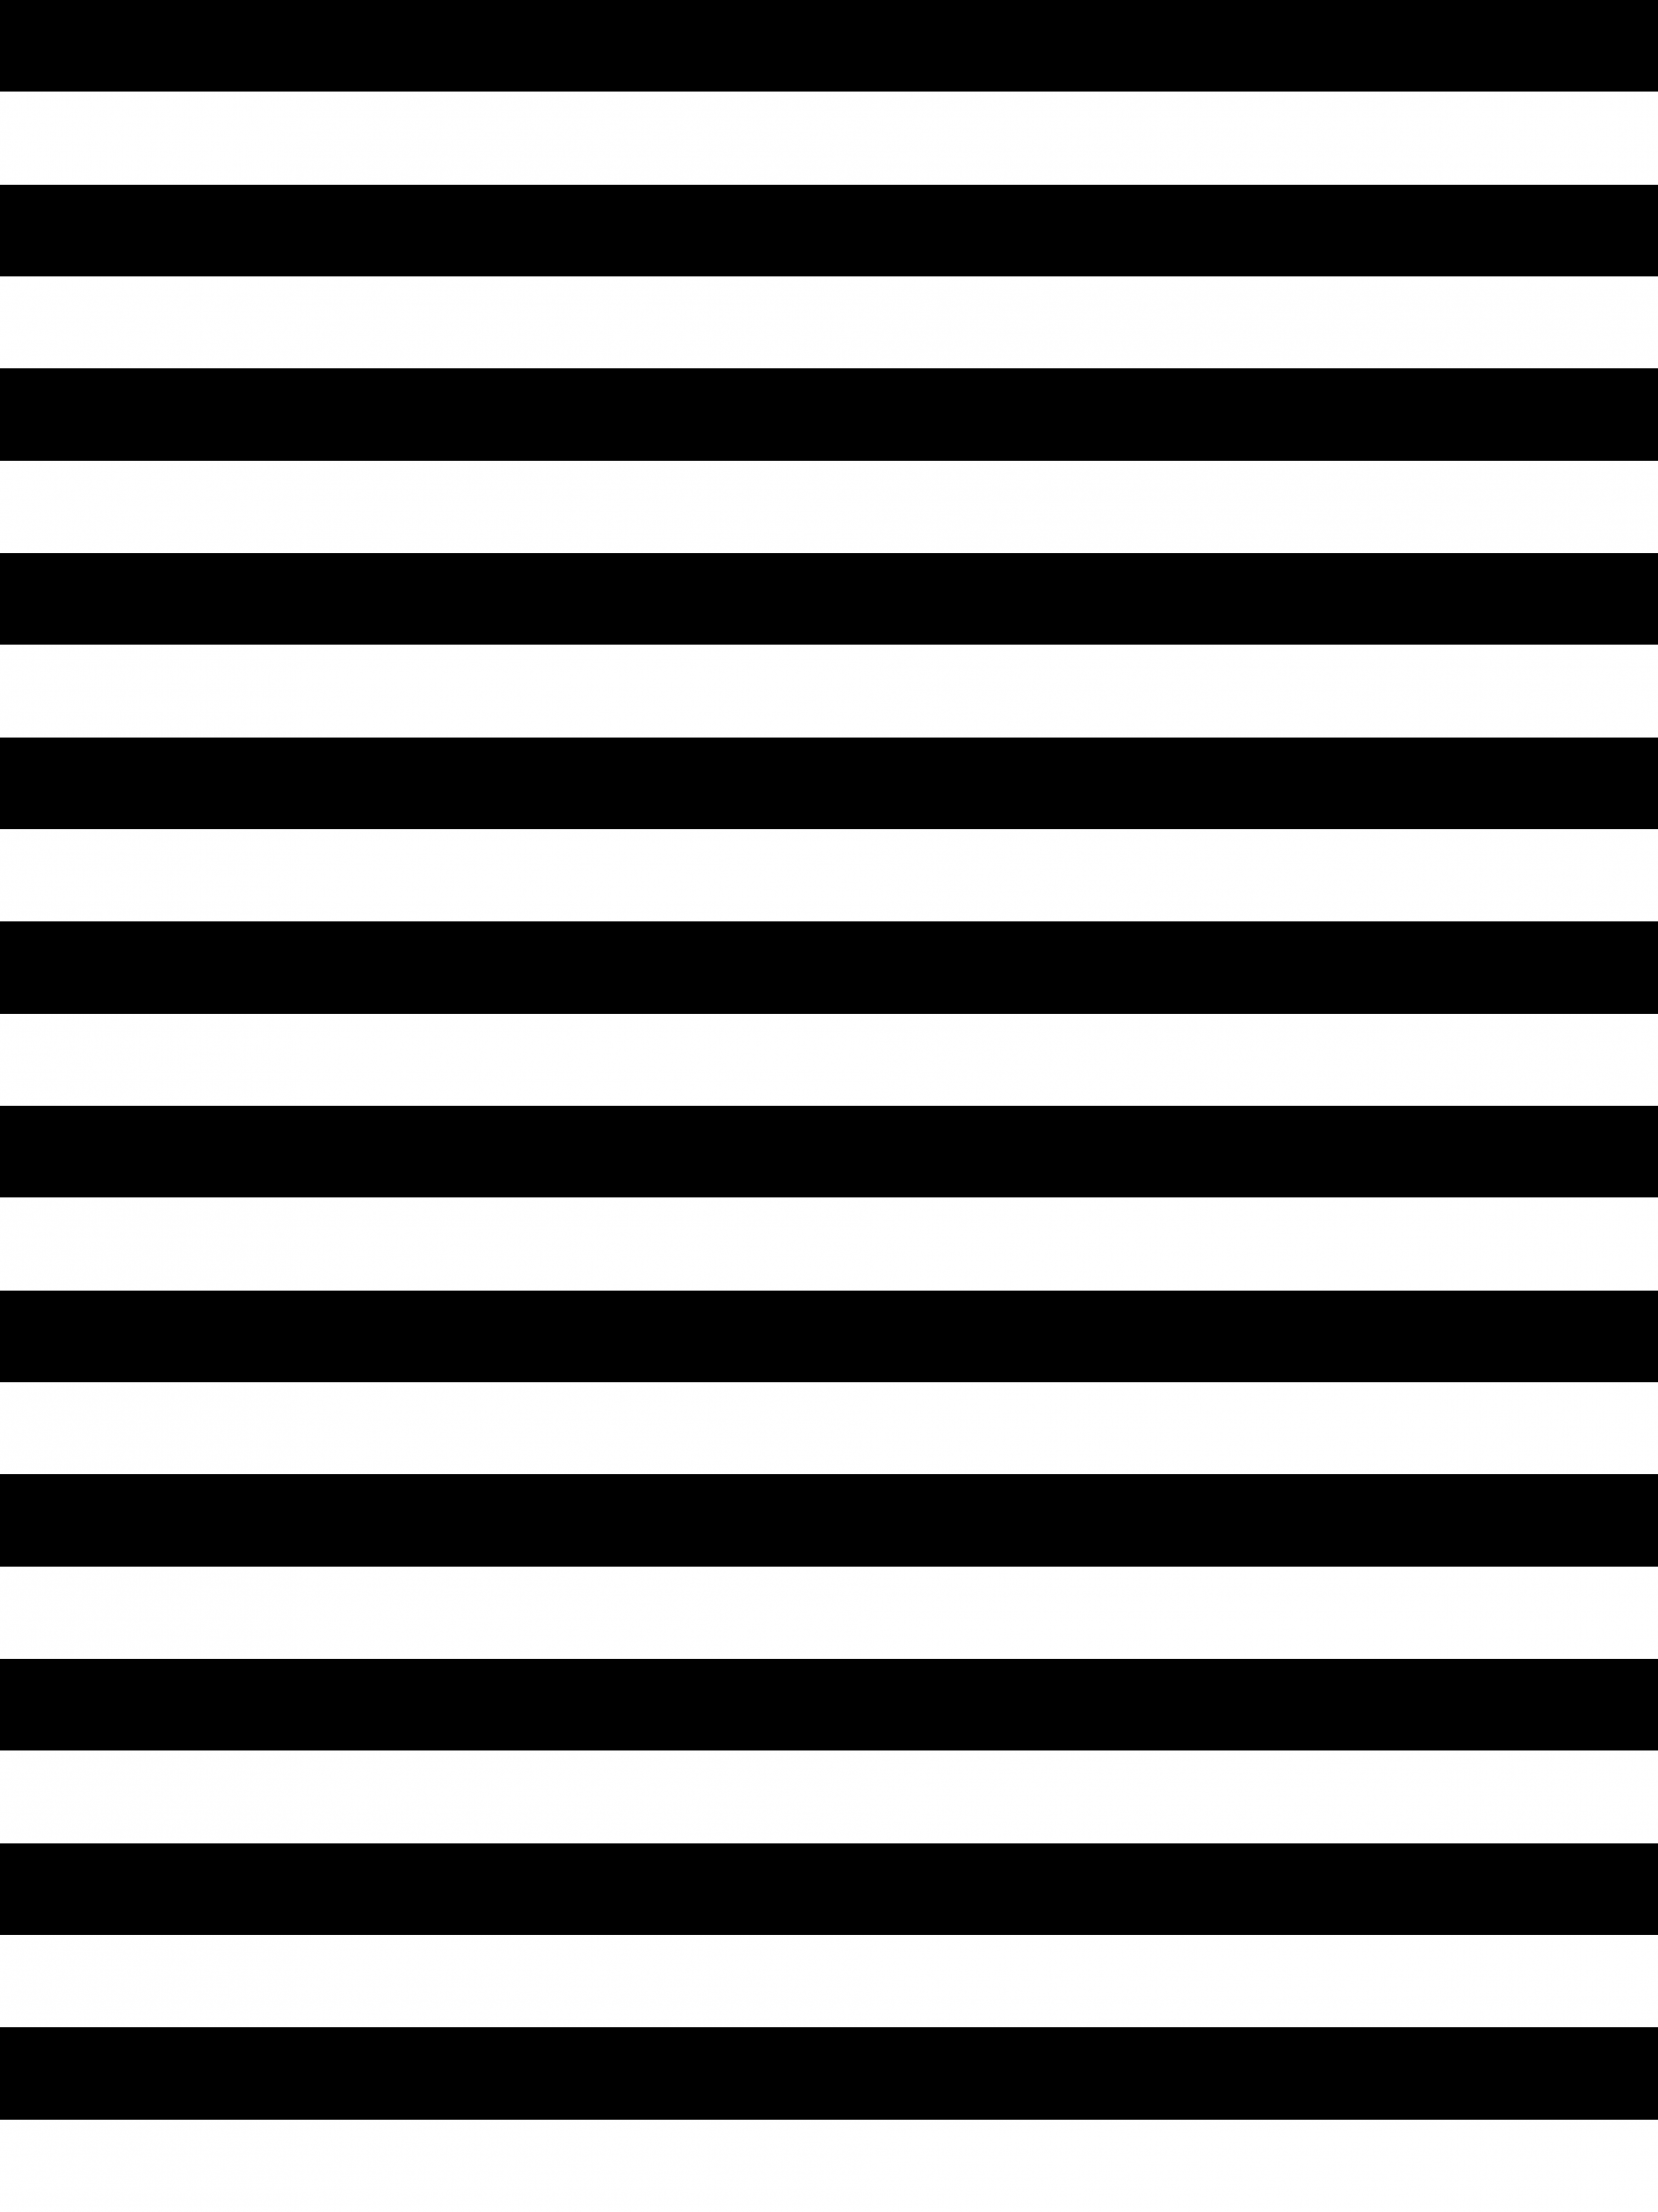 Black and White Striped Wallpapers - Top Free Black and White Striped ...